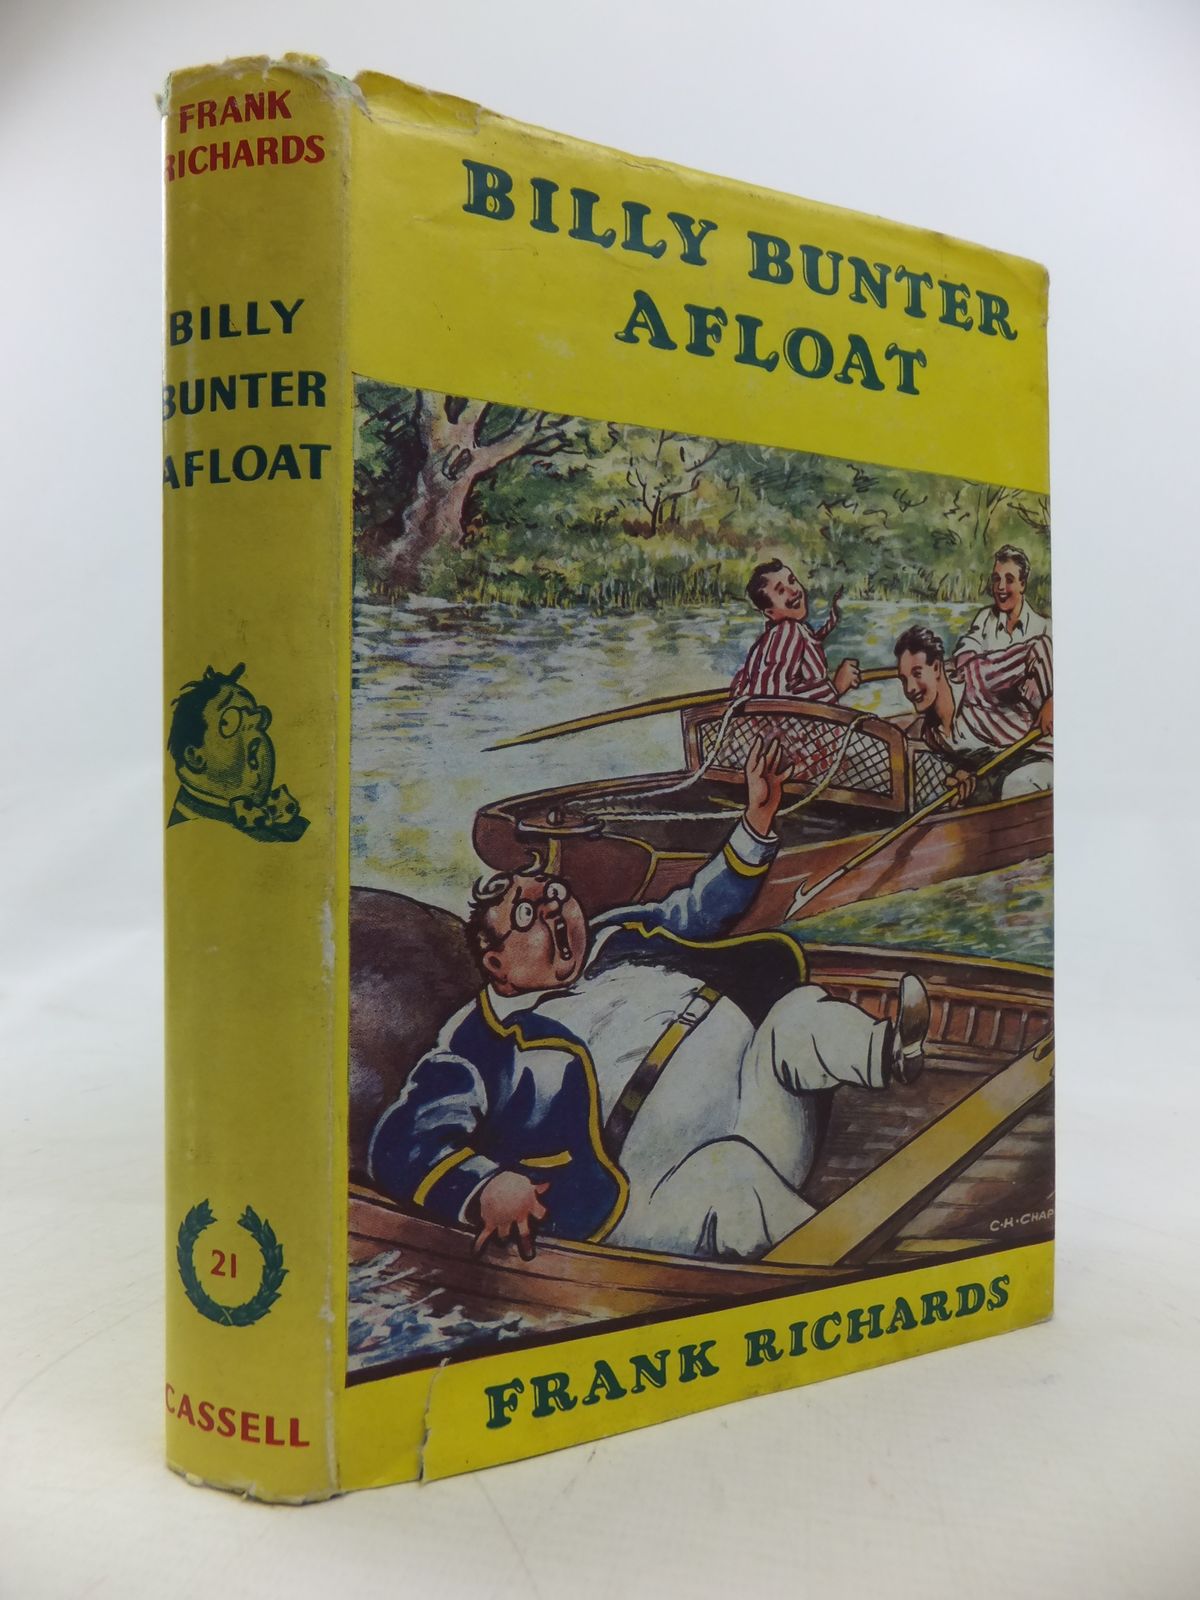 Photo of BILLY BUNTER AFLOAT written by Richards, Frank illustrated by Chapman, C.H. published by Cassell & Co. Ltd. (STOCK CODE: 2115626)  for sale by Stella & Rose's Books